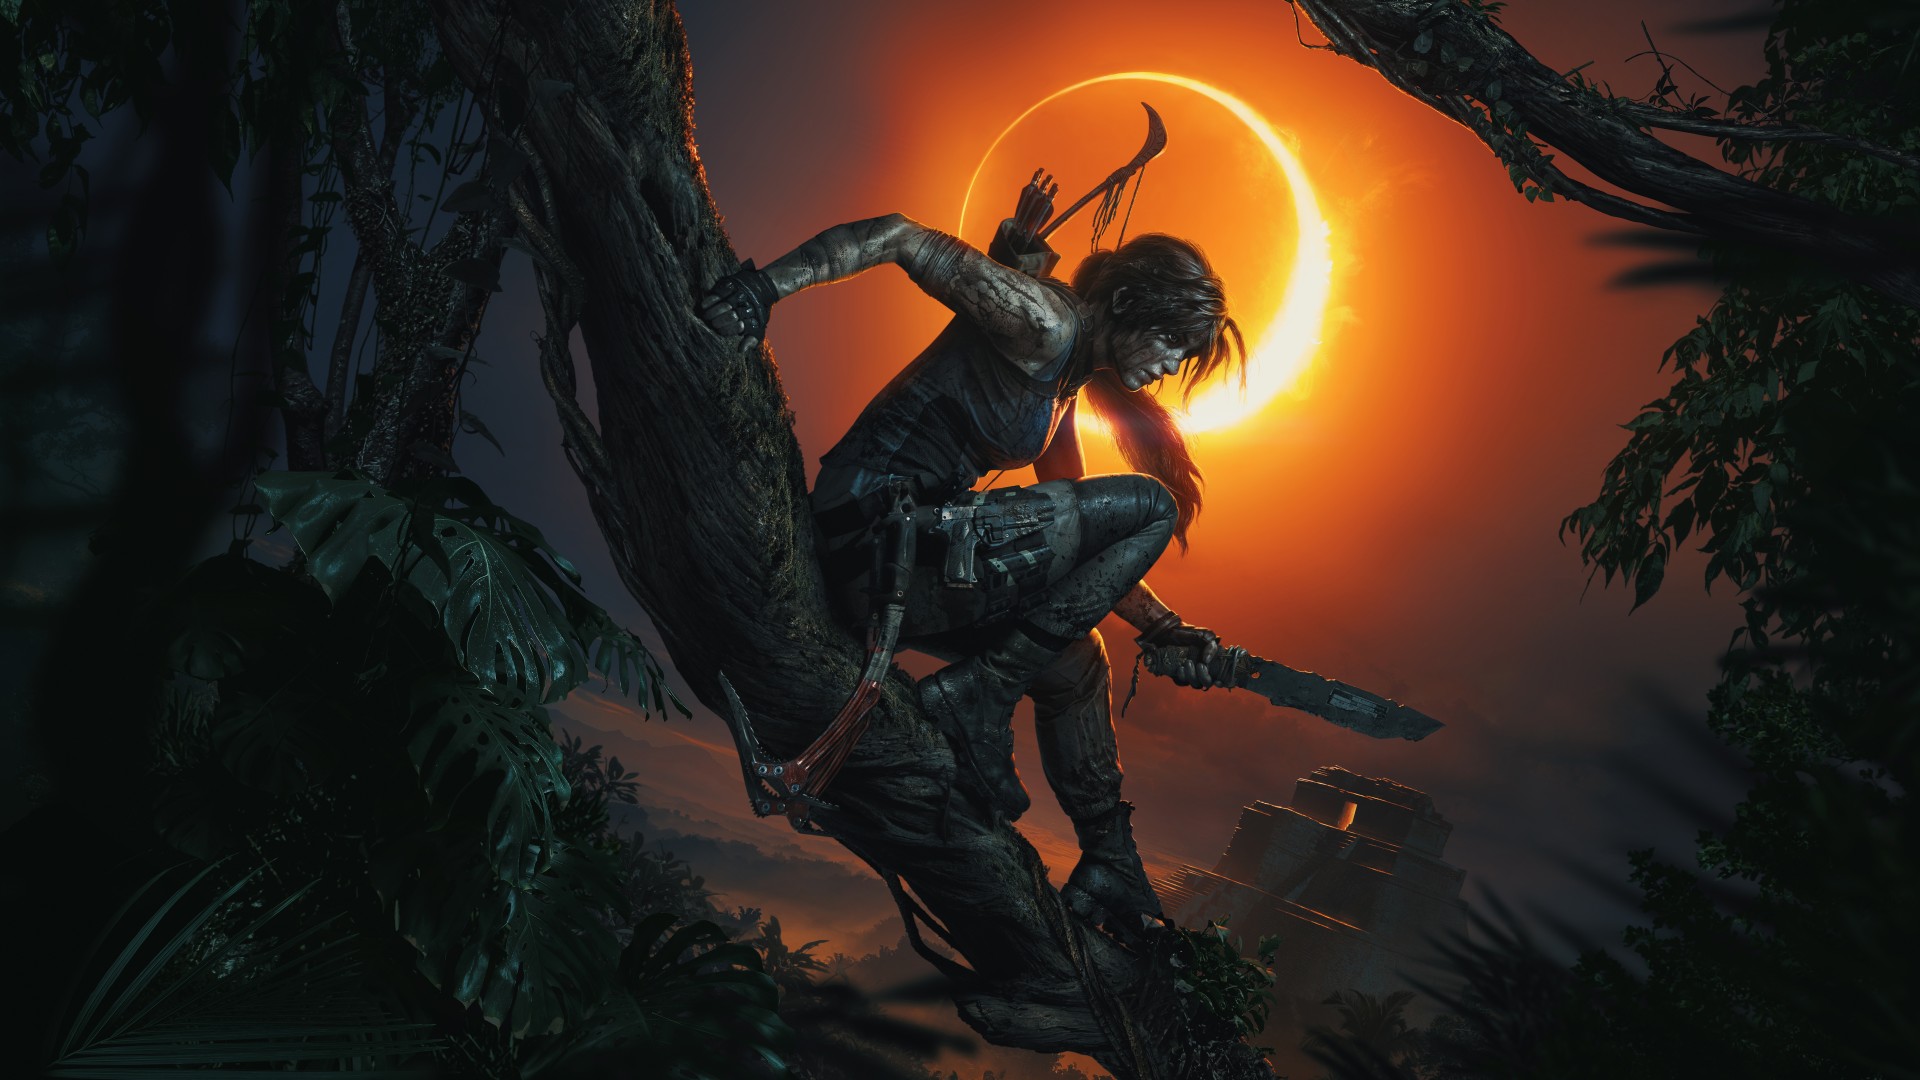 shadow of the tomb raider full game